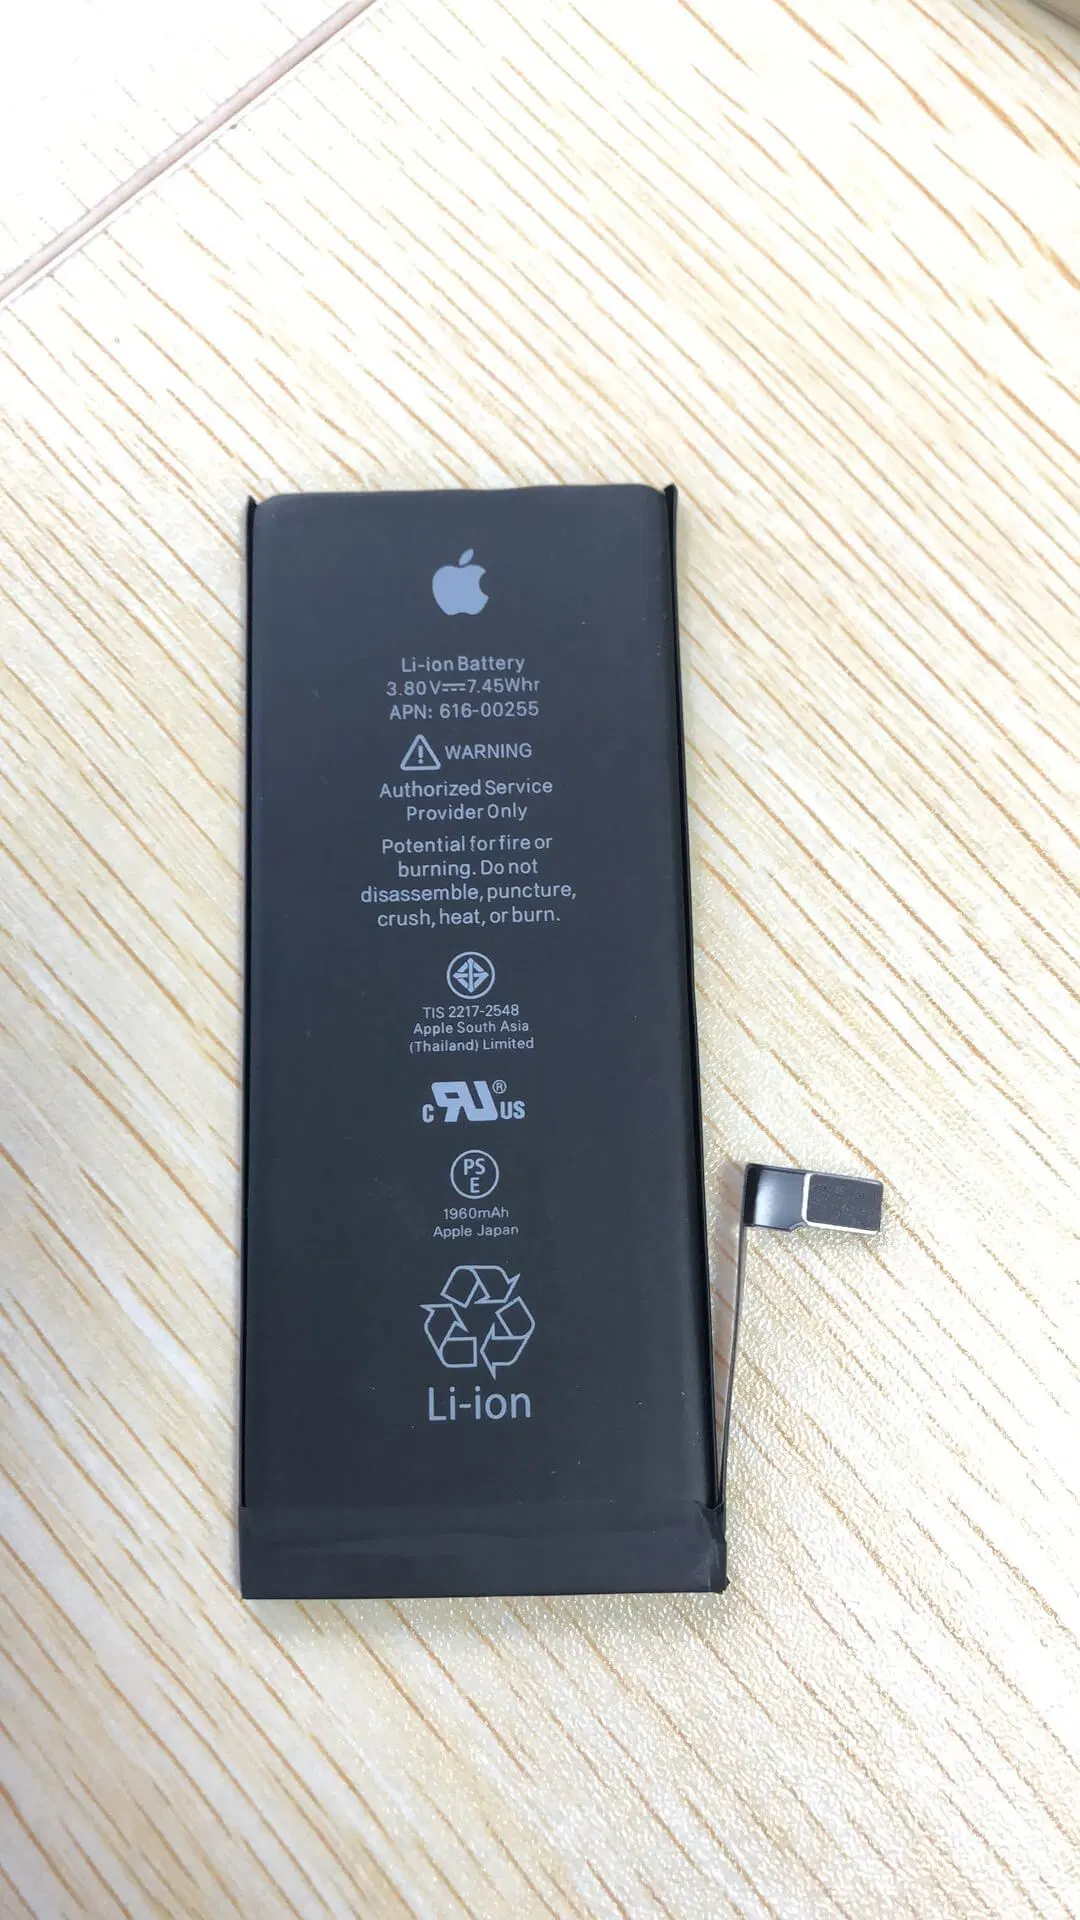 2021 High quality/High cost performance  Original Cell/Smart/Mobile Phone Battery for iPhone 5/5s/6/ 6s /6p /6sp/ 7 /7p /8/ 8p